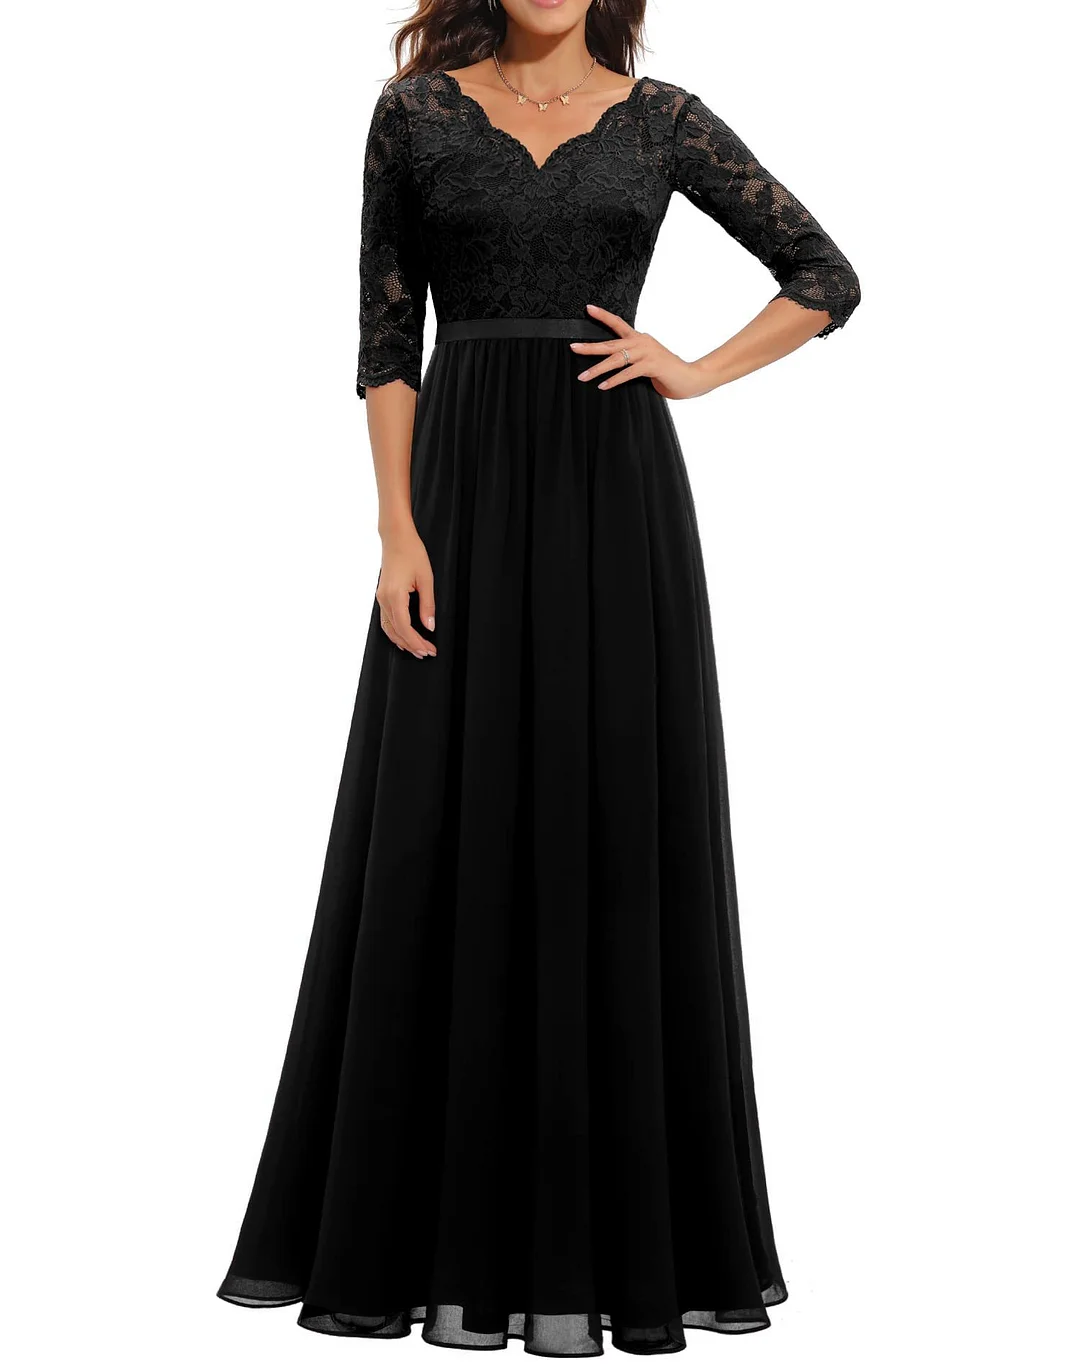 Women's new lace splicing long waisted noble dress dresses